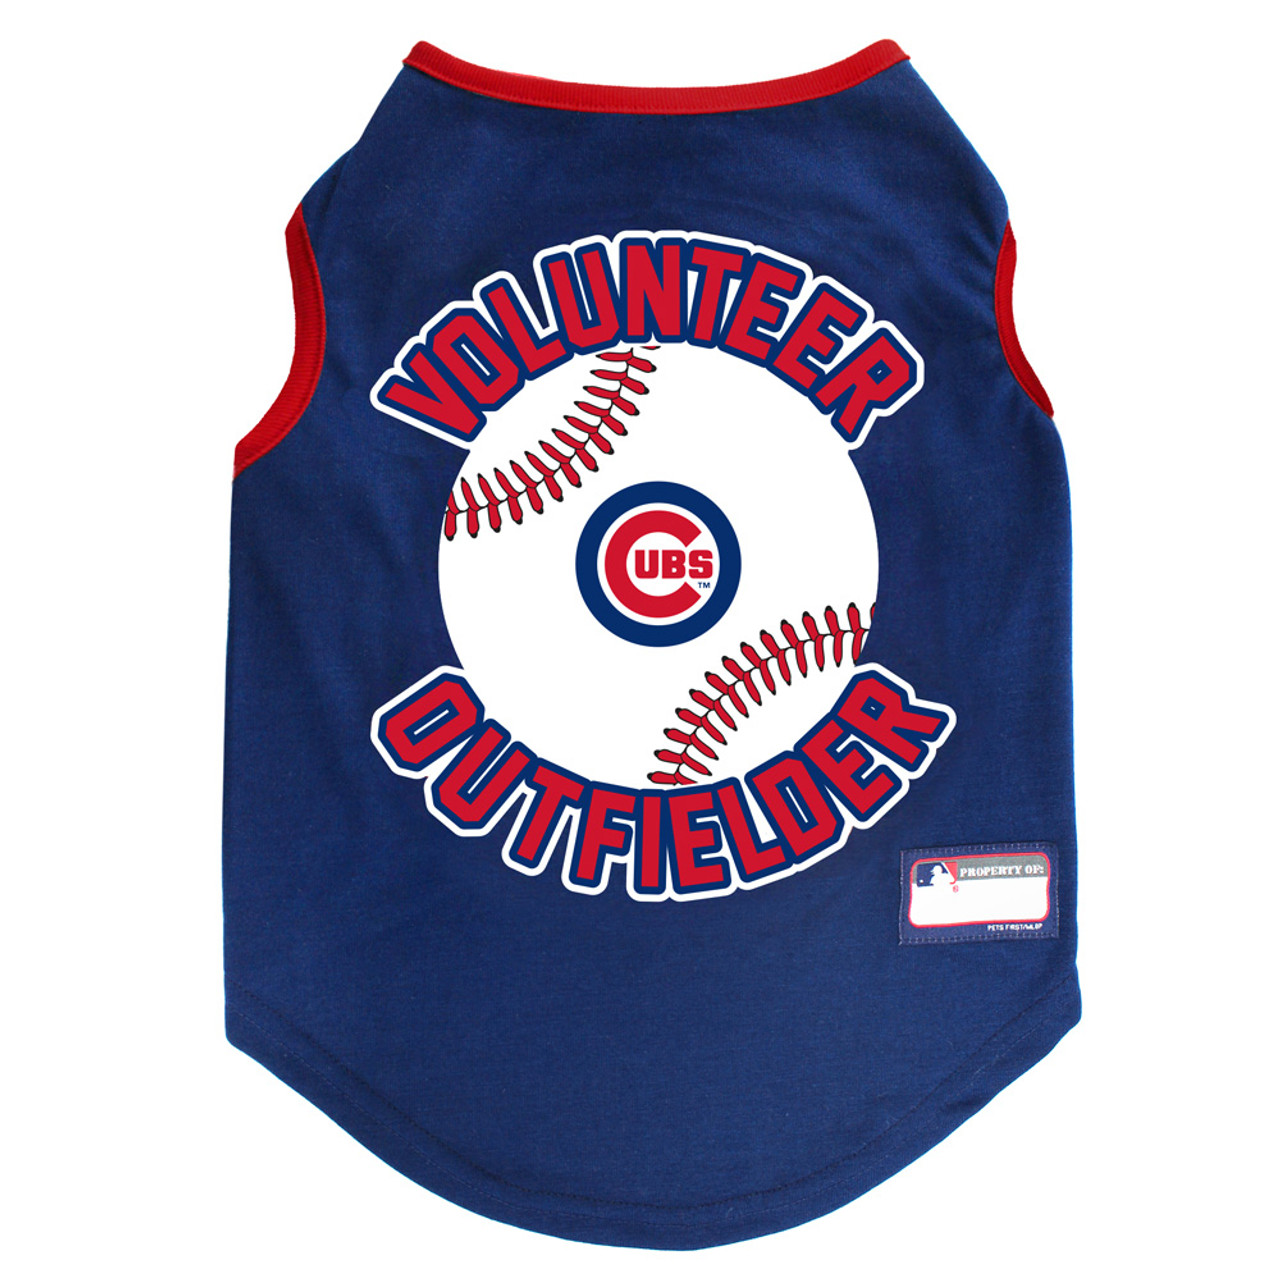 Chicago Cubs MLB Baseball Jersey Toddler Baby 2T